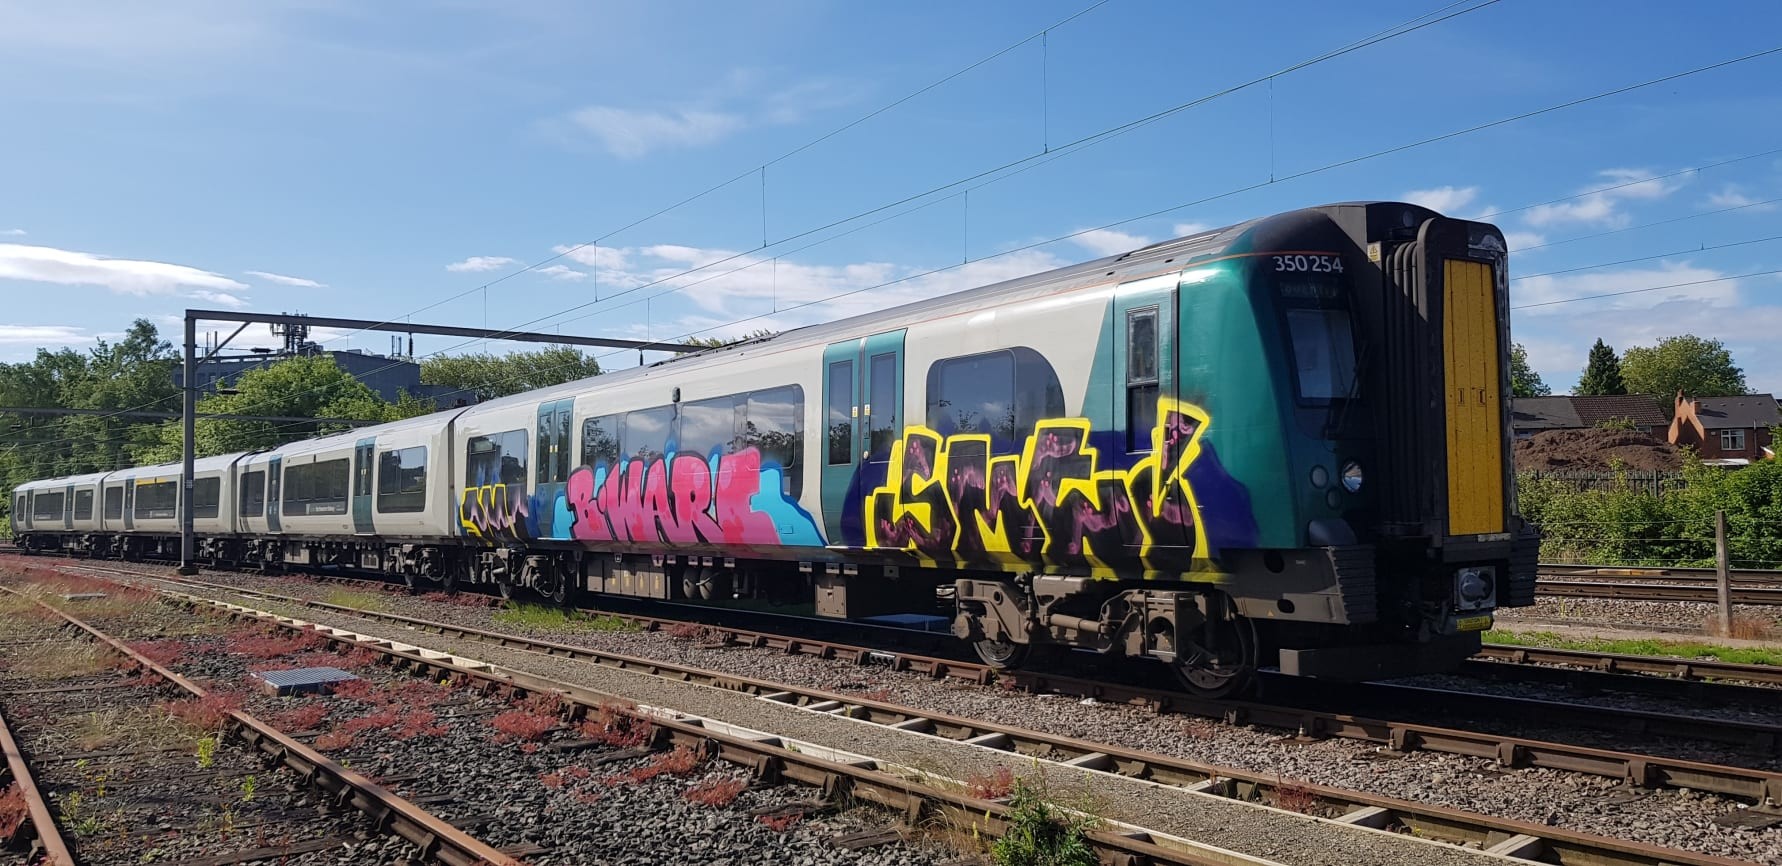 London Northwestern Railway issues vandalism warning after graffiti takes trains out of action